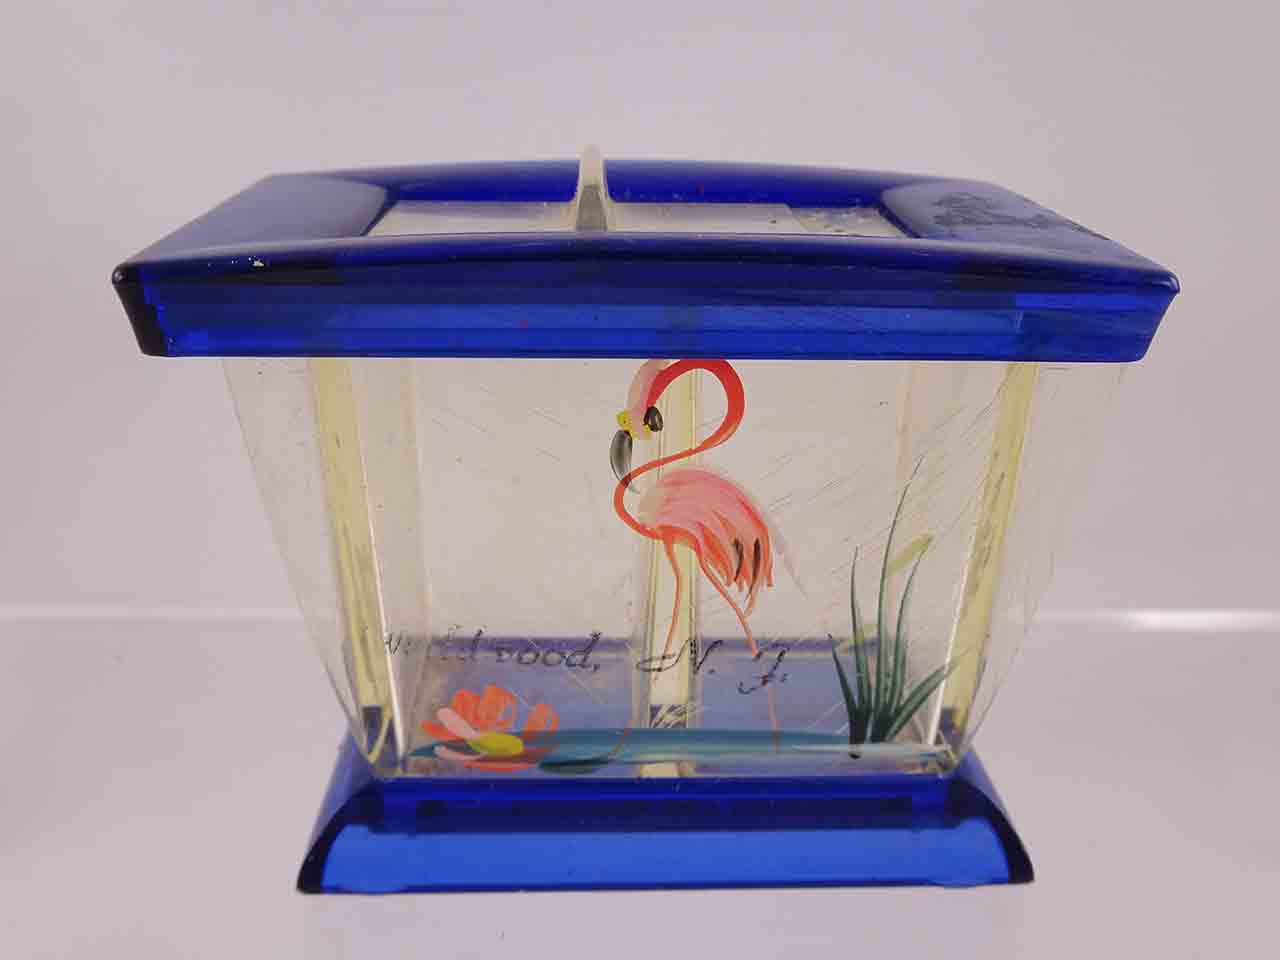 Plastic one piece fish tank with flamingo salt and pepper shakers